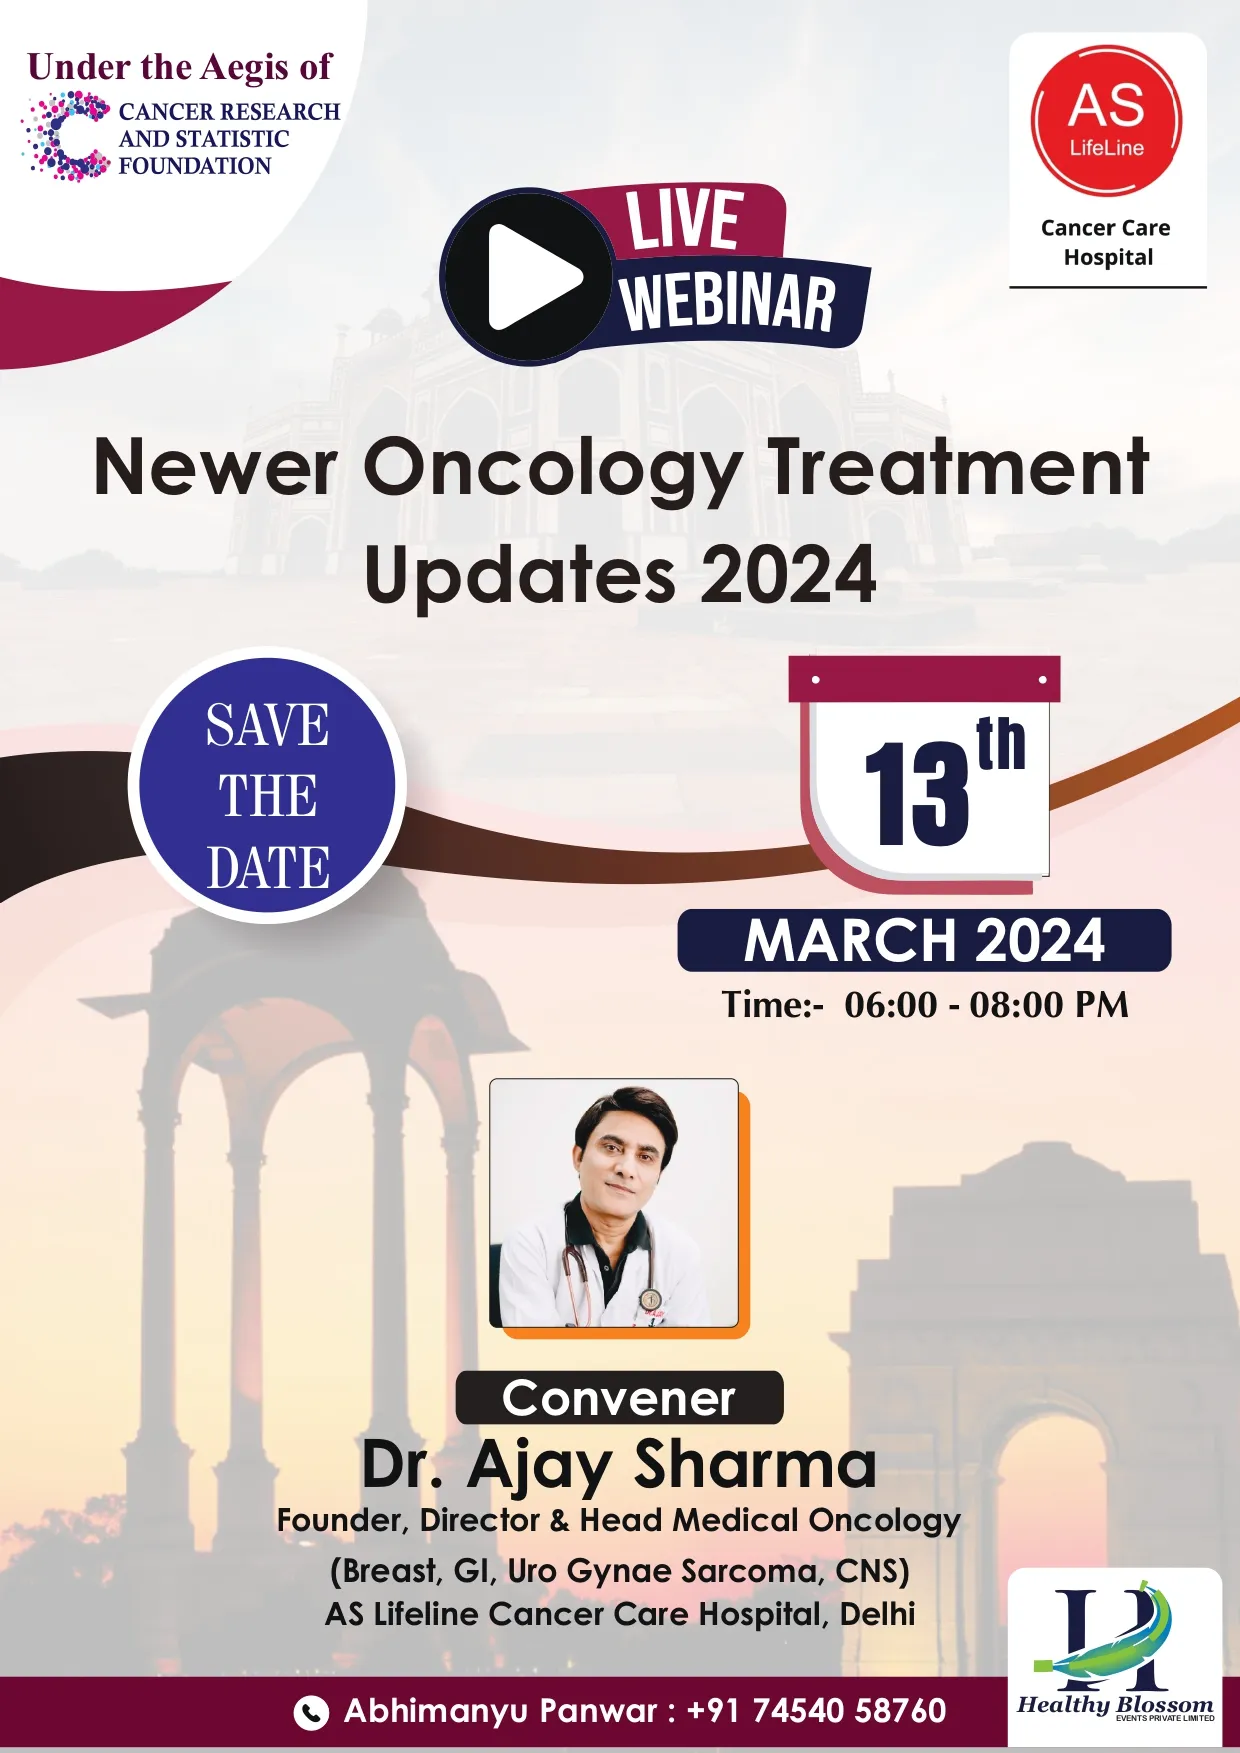 Newer Oncology Treatment Updates 2024